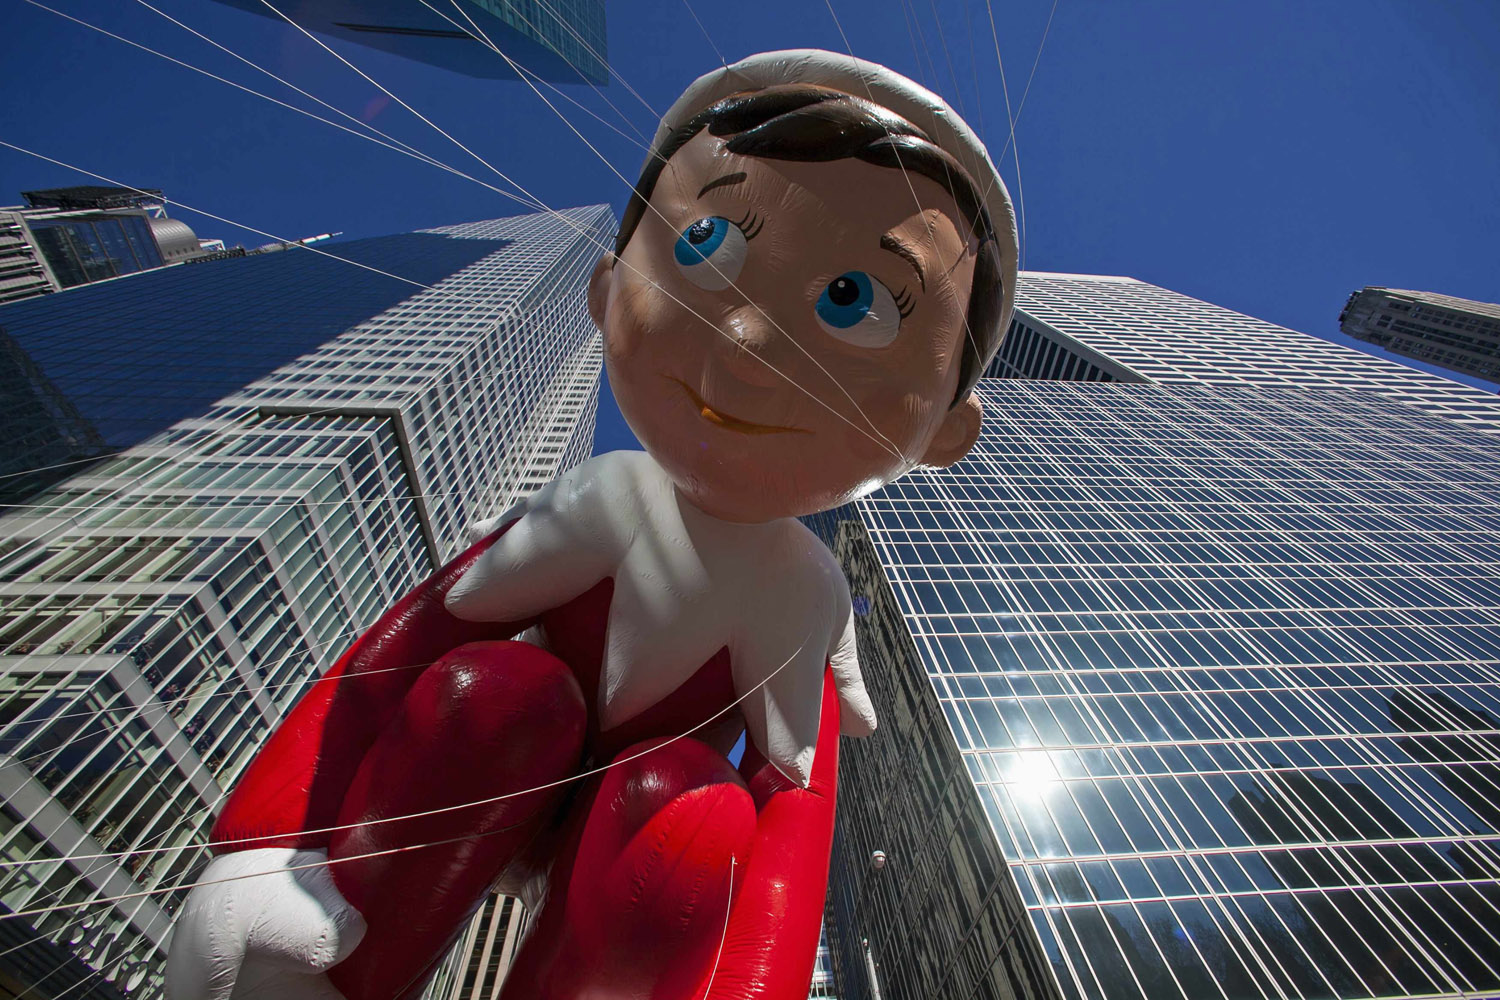 The Elf on the Shelf balloon floats down Sixth Avenue during the 87th Macy's Thanksgiving Day Parade in New York